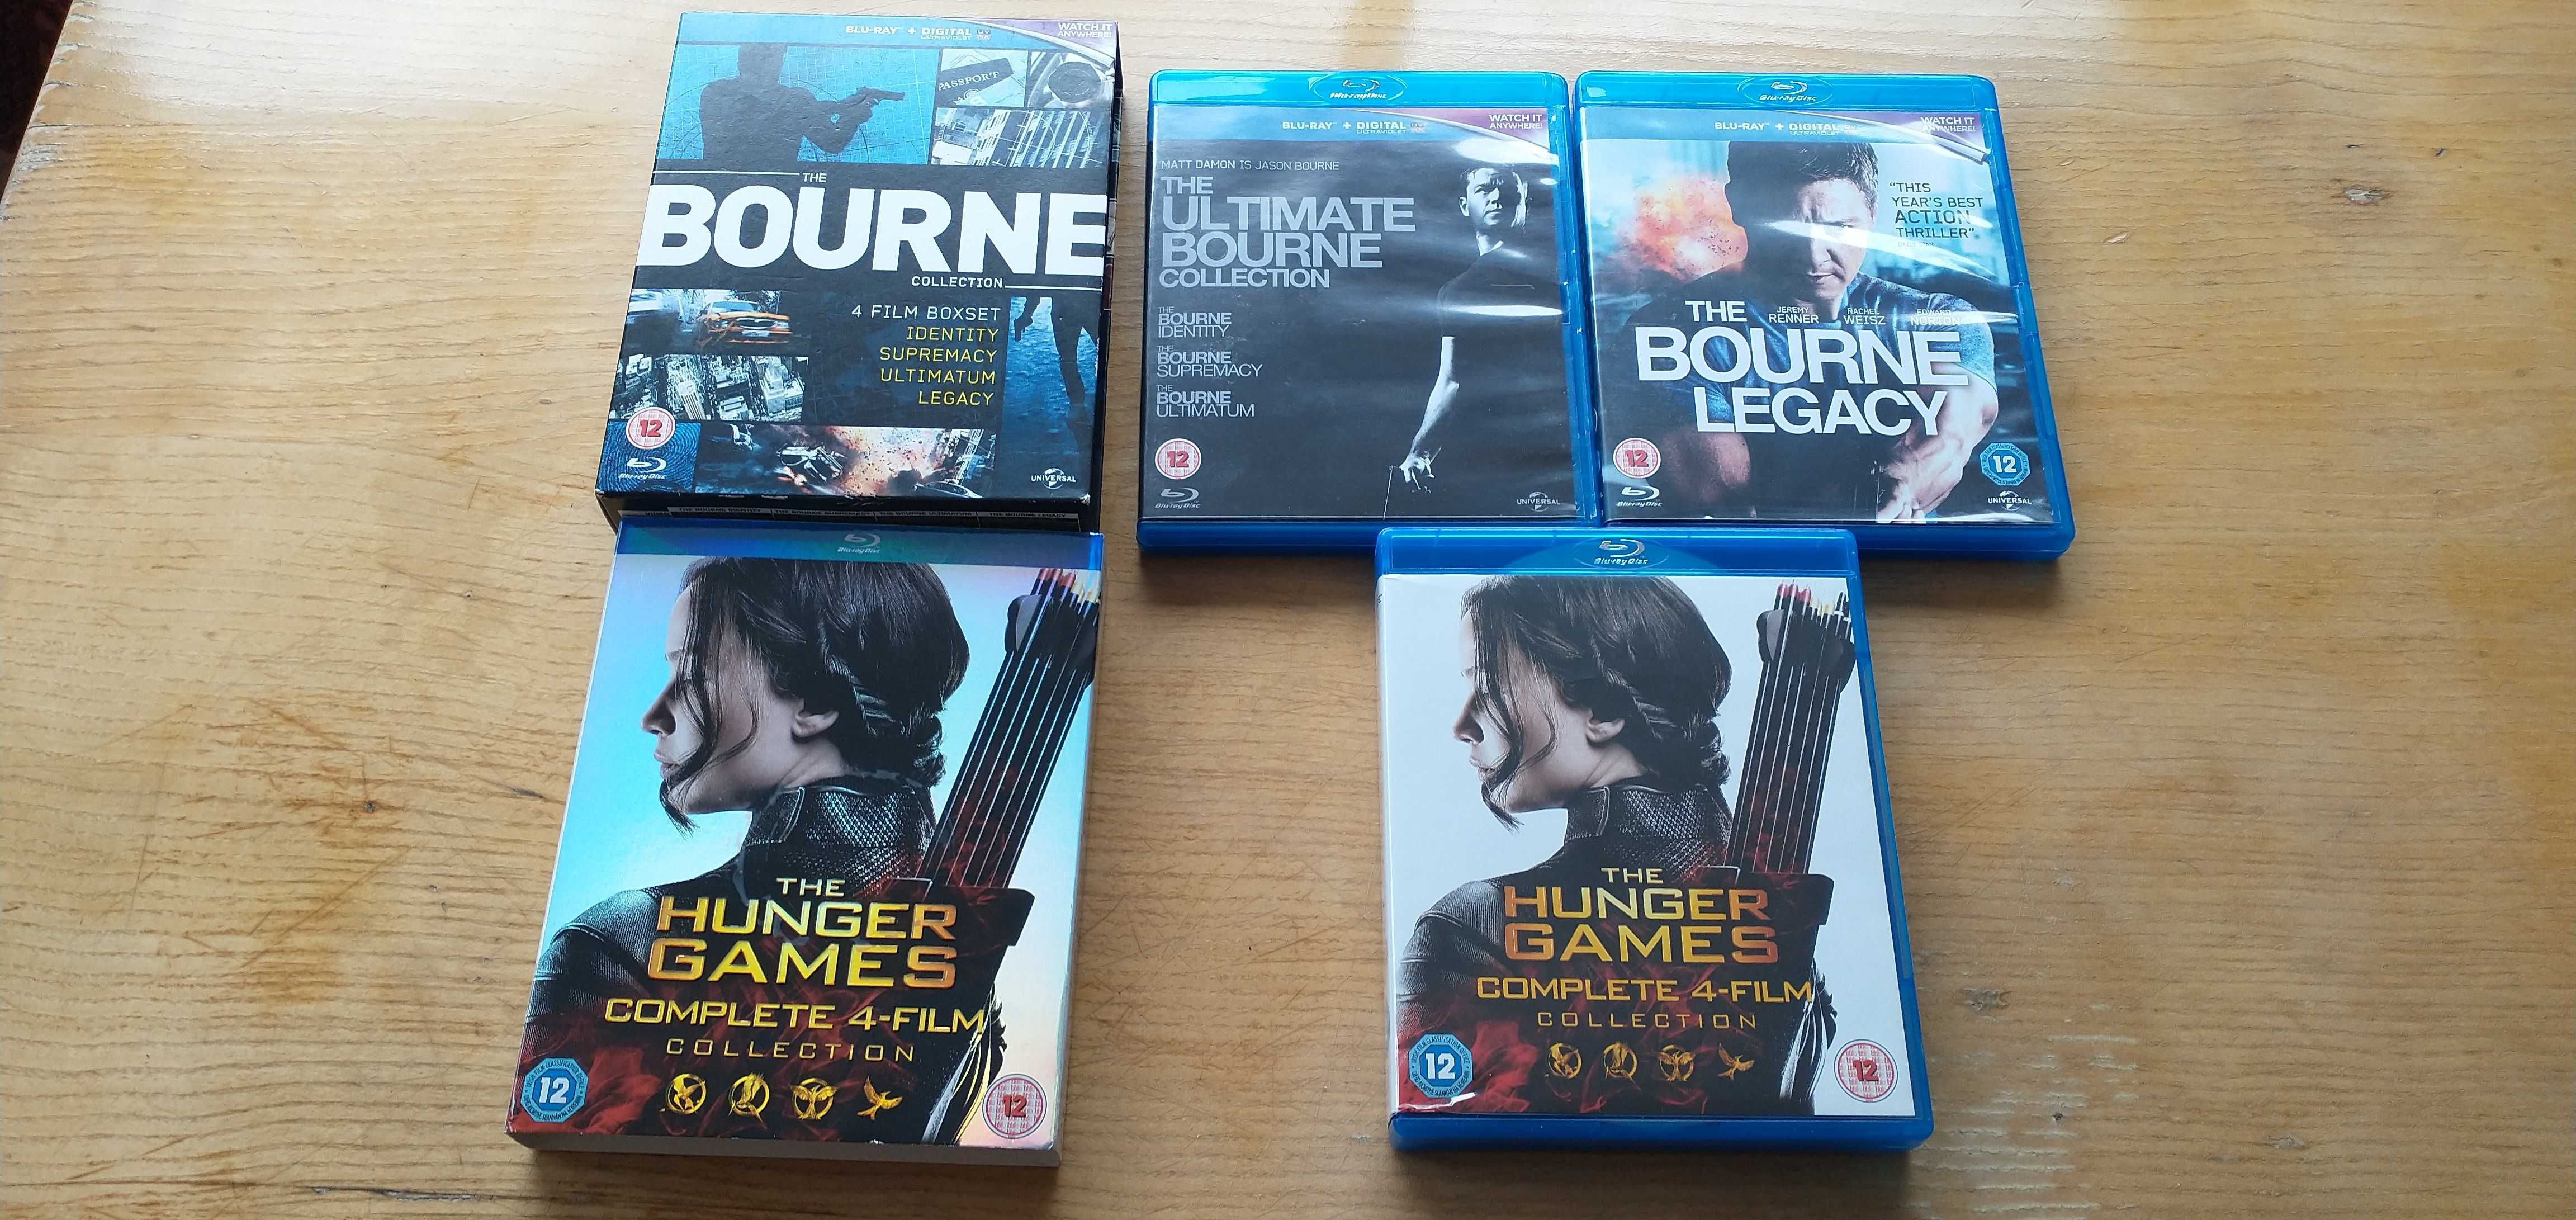 Vand colectia The Bourne + The Hunger Games - filme bluray / blu-ray